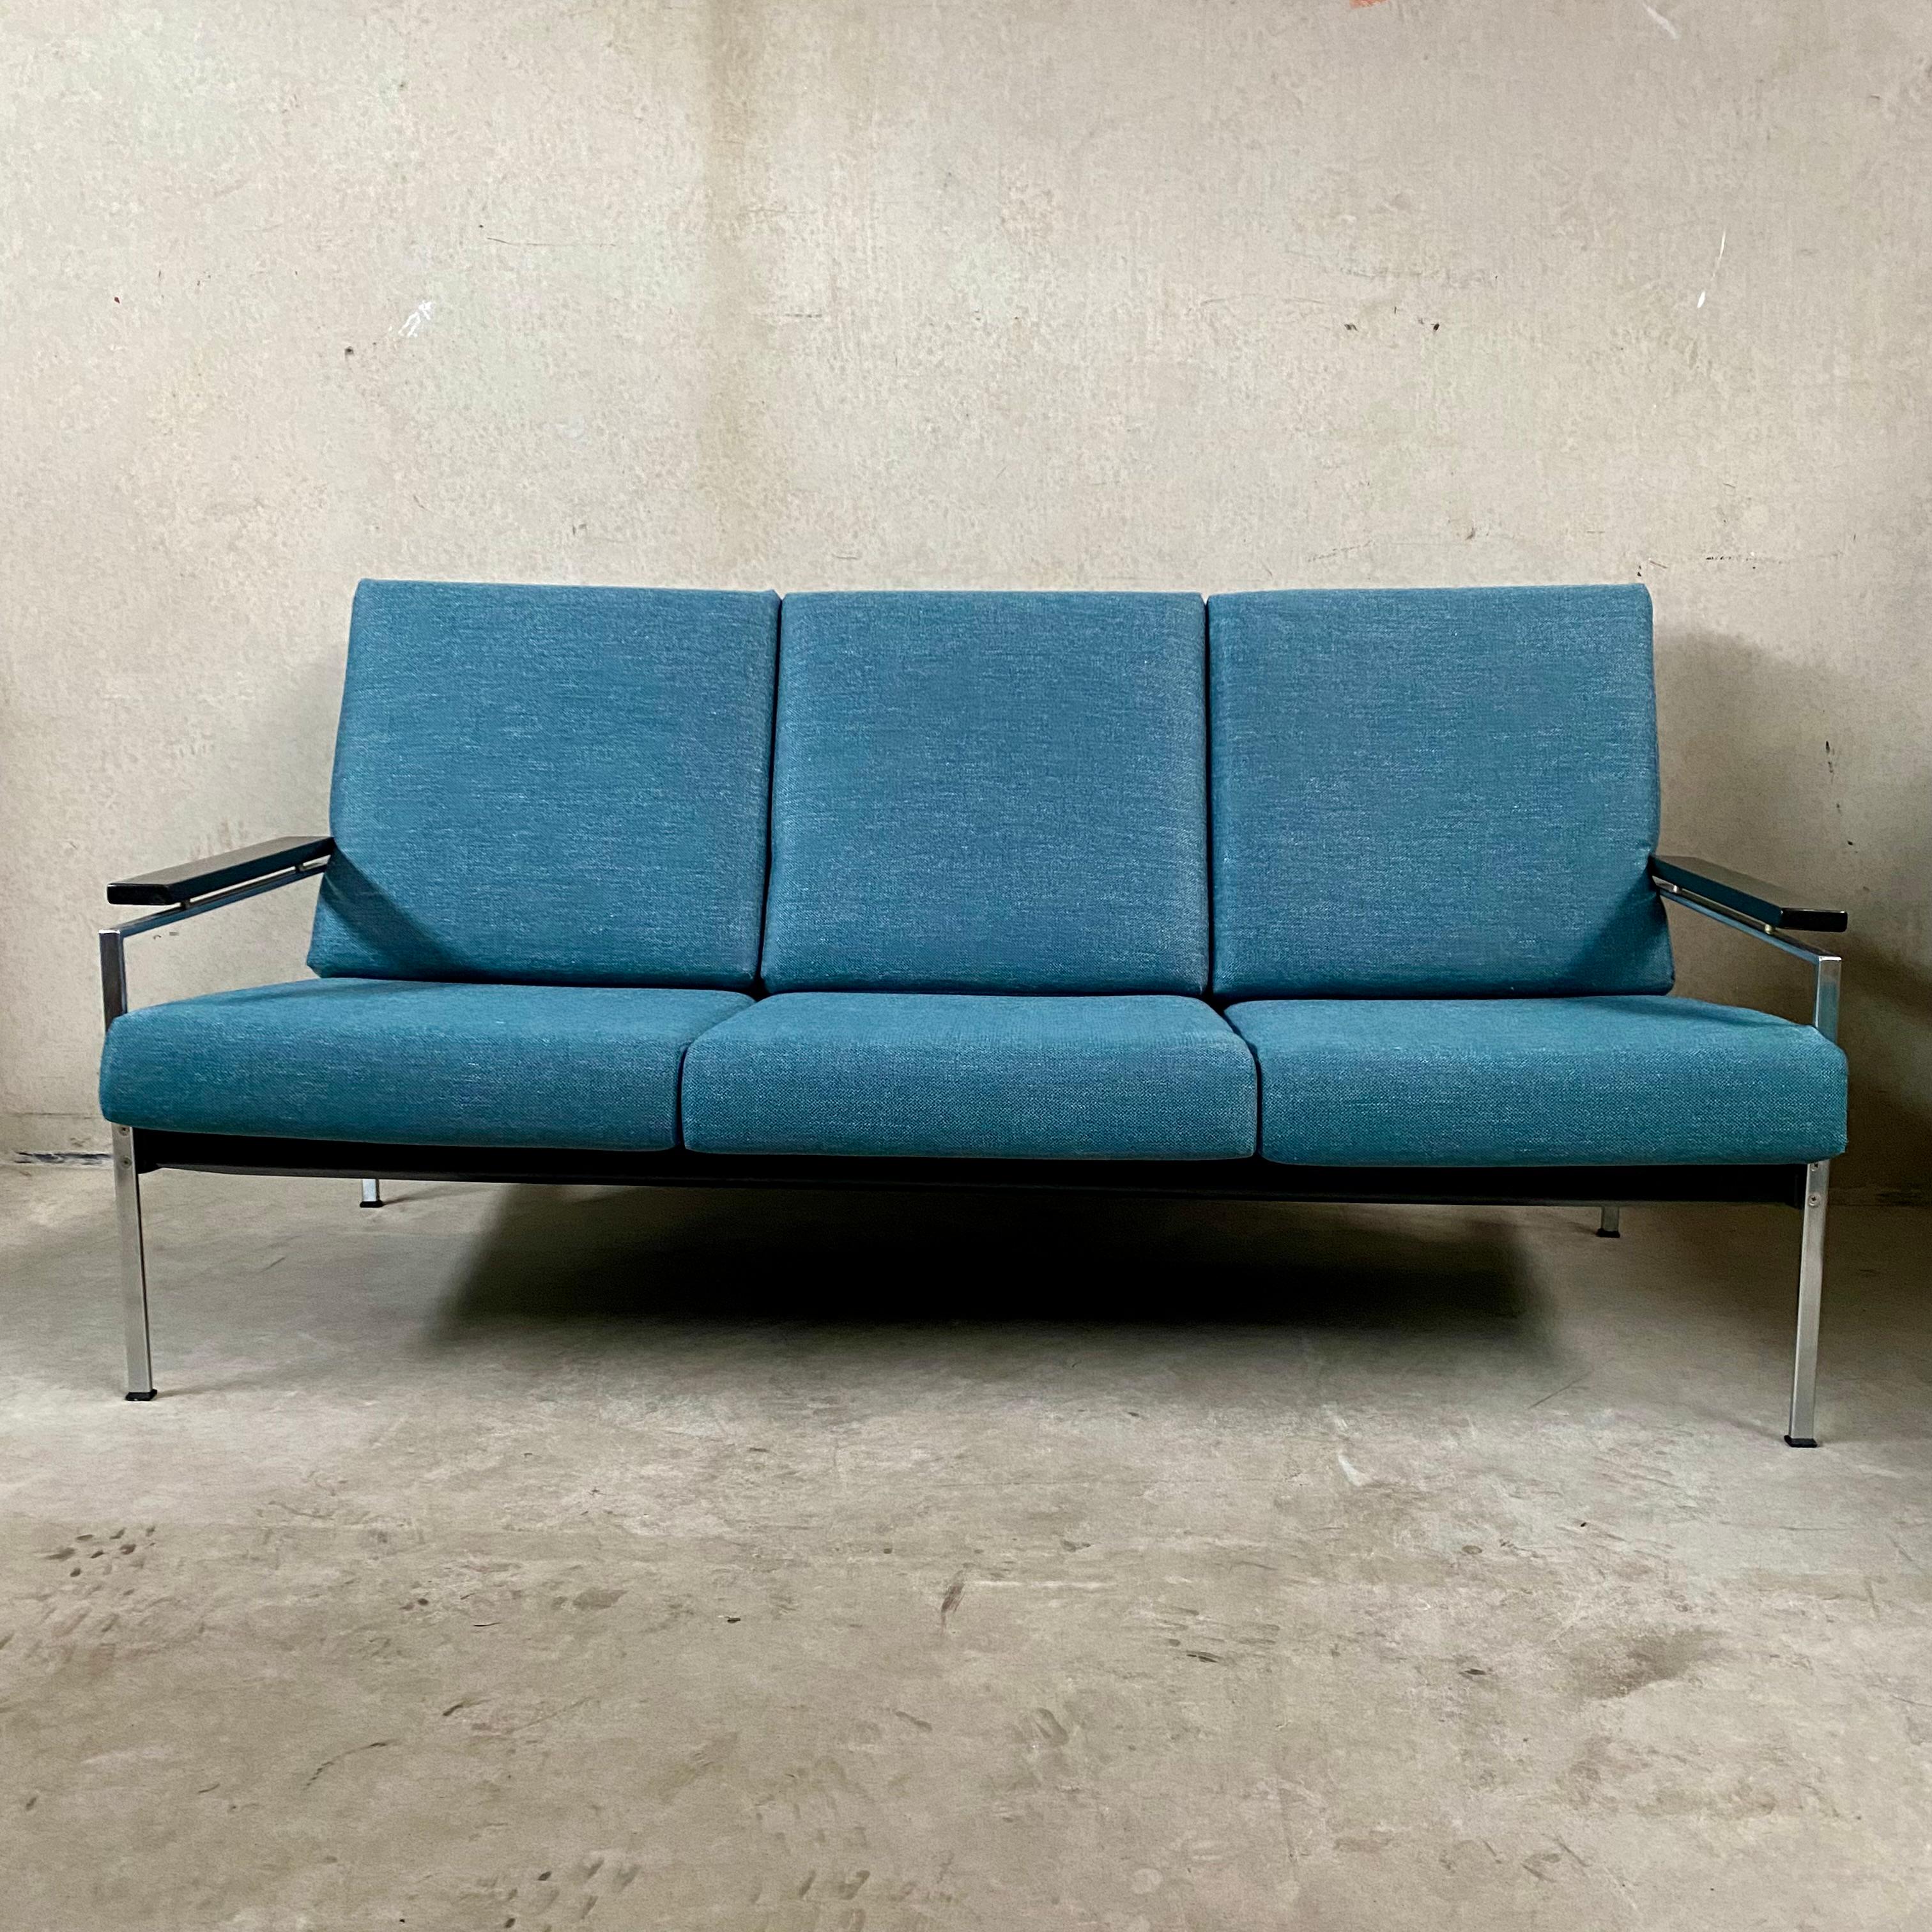 Dutch 3-seater Sofa by Rob Parry for Gelderland, Netherlands 1970 For Sale